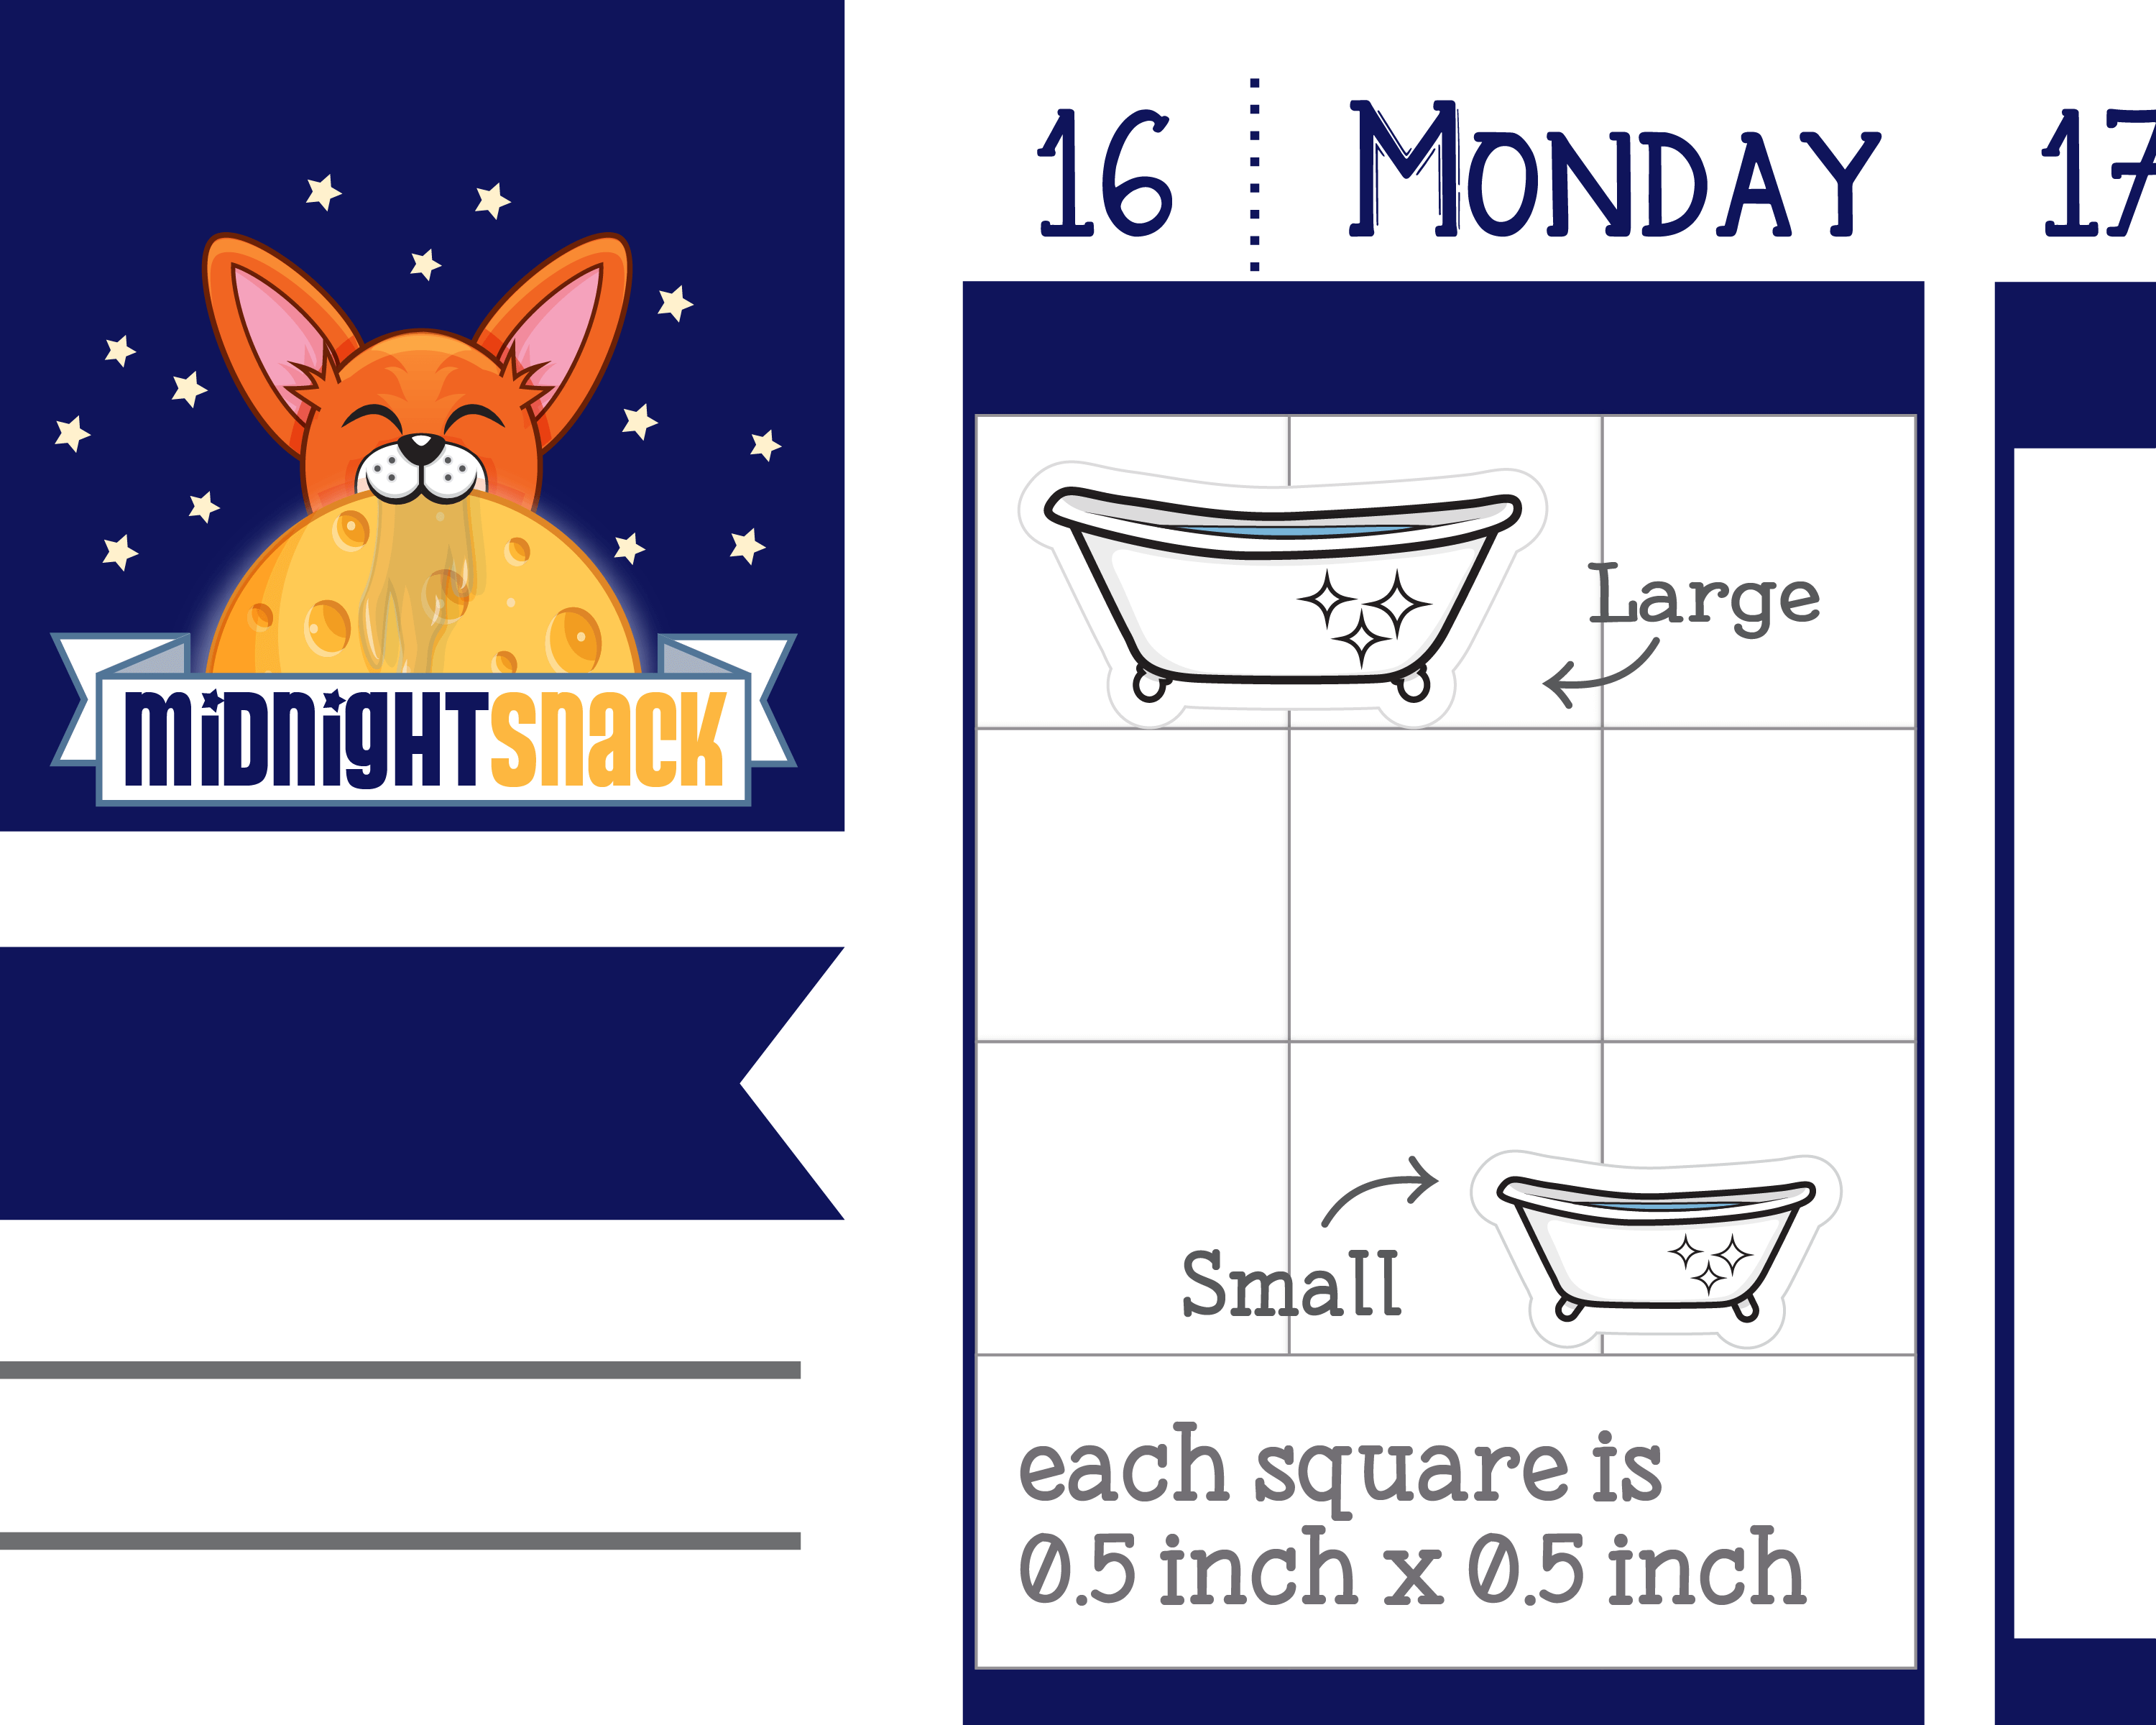 Clean the Bathtub Icon: Household Chores Planner Stickers Midnight Snack Planner